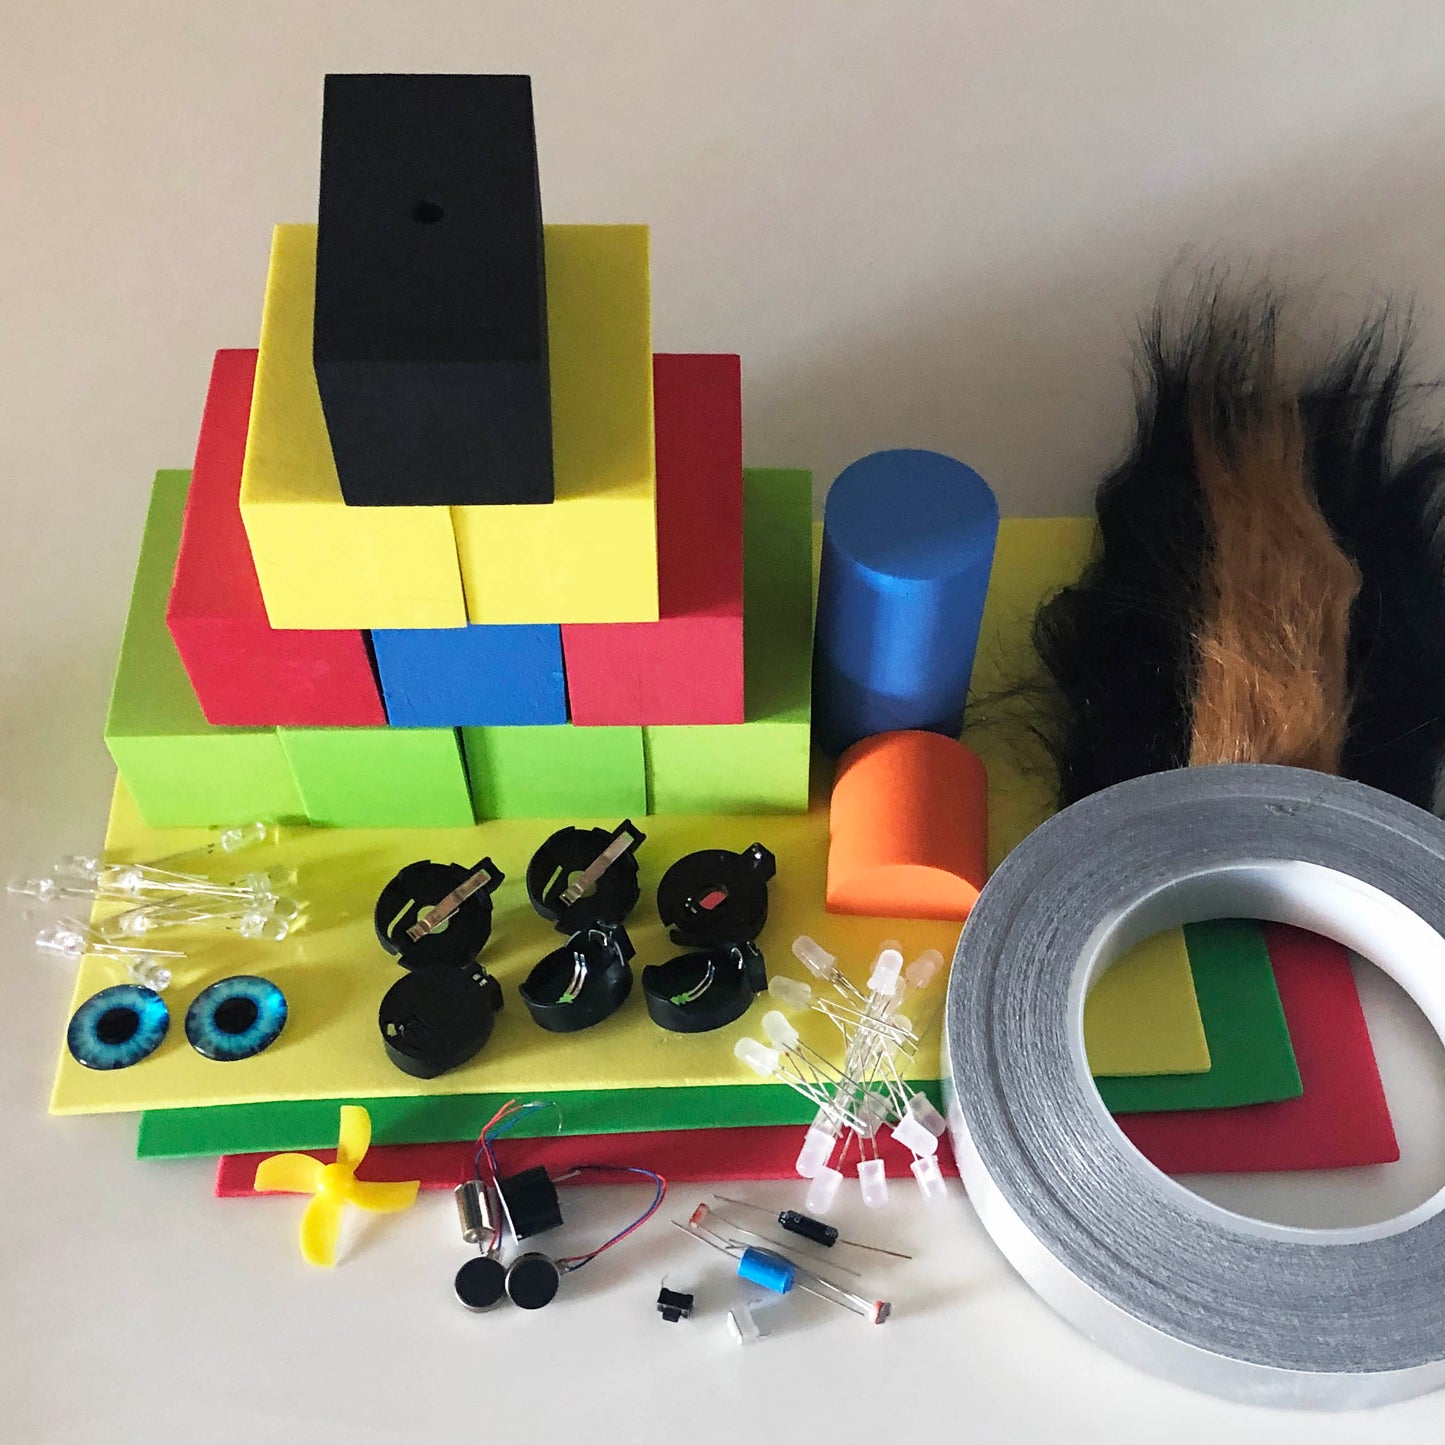 Contents of the TapeBlock making kit in a pile including Foam Blocks and sheet foam, LEDs, switches, motors and conductive tape, fur and eyes are included. This is more spaced out